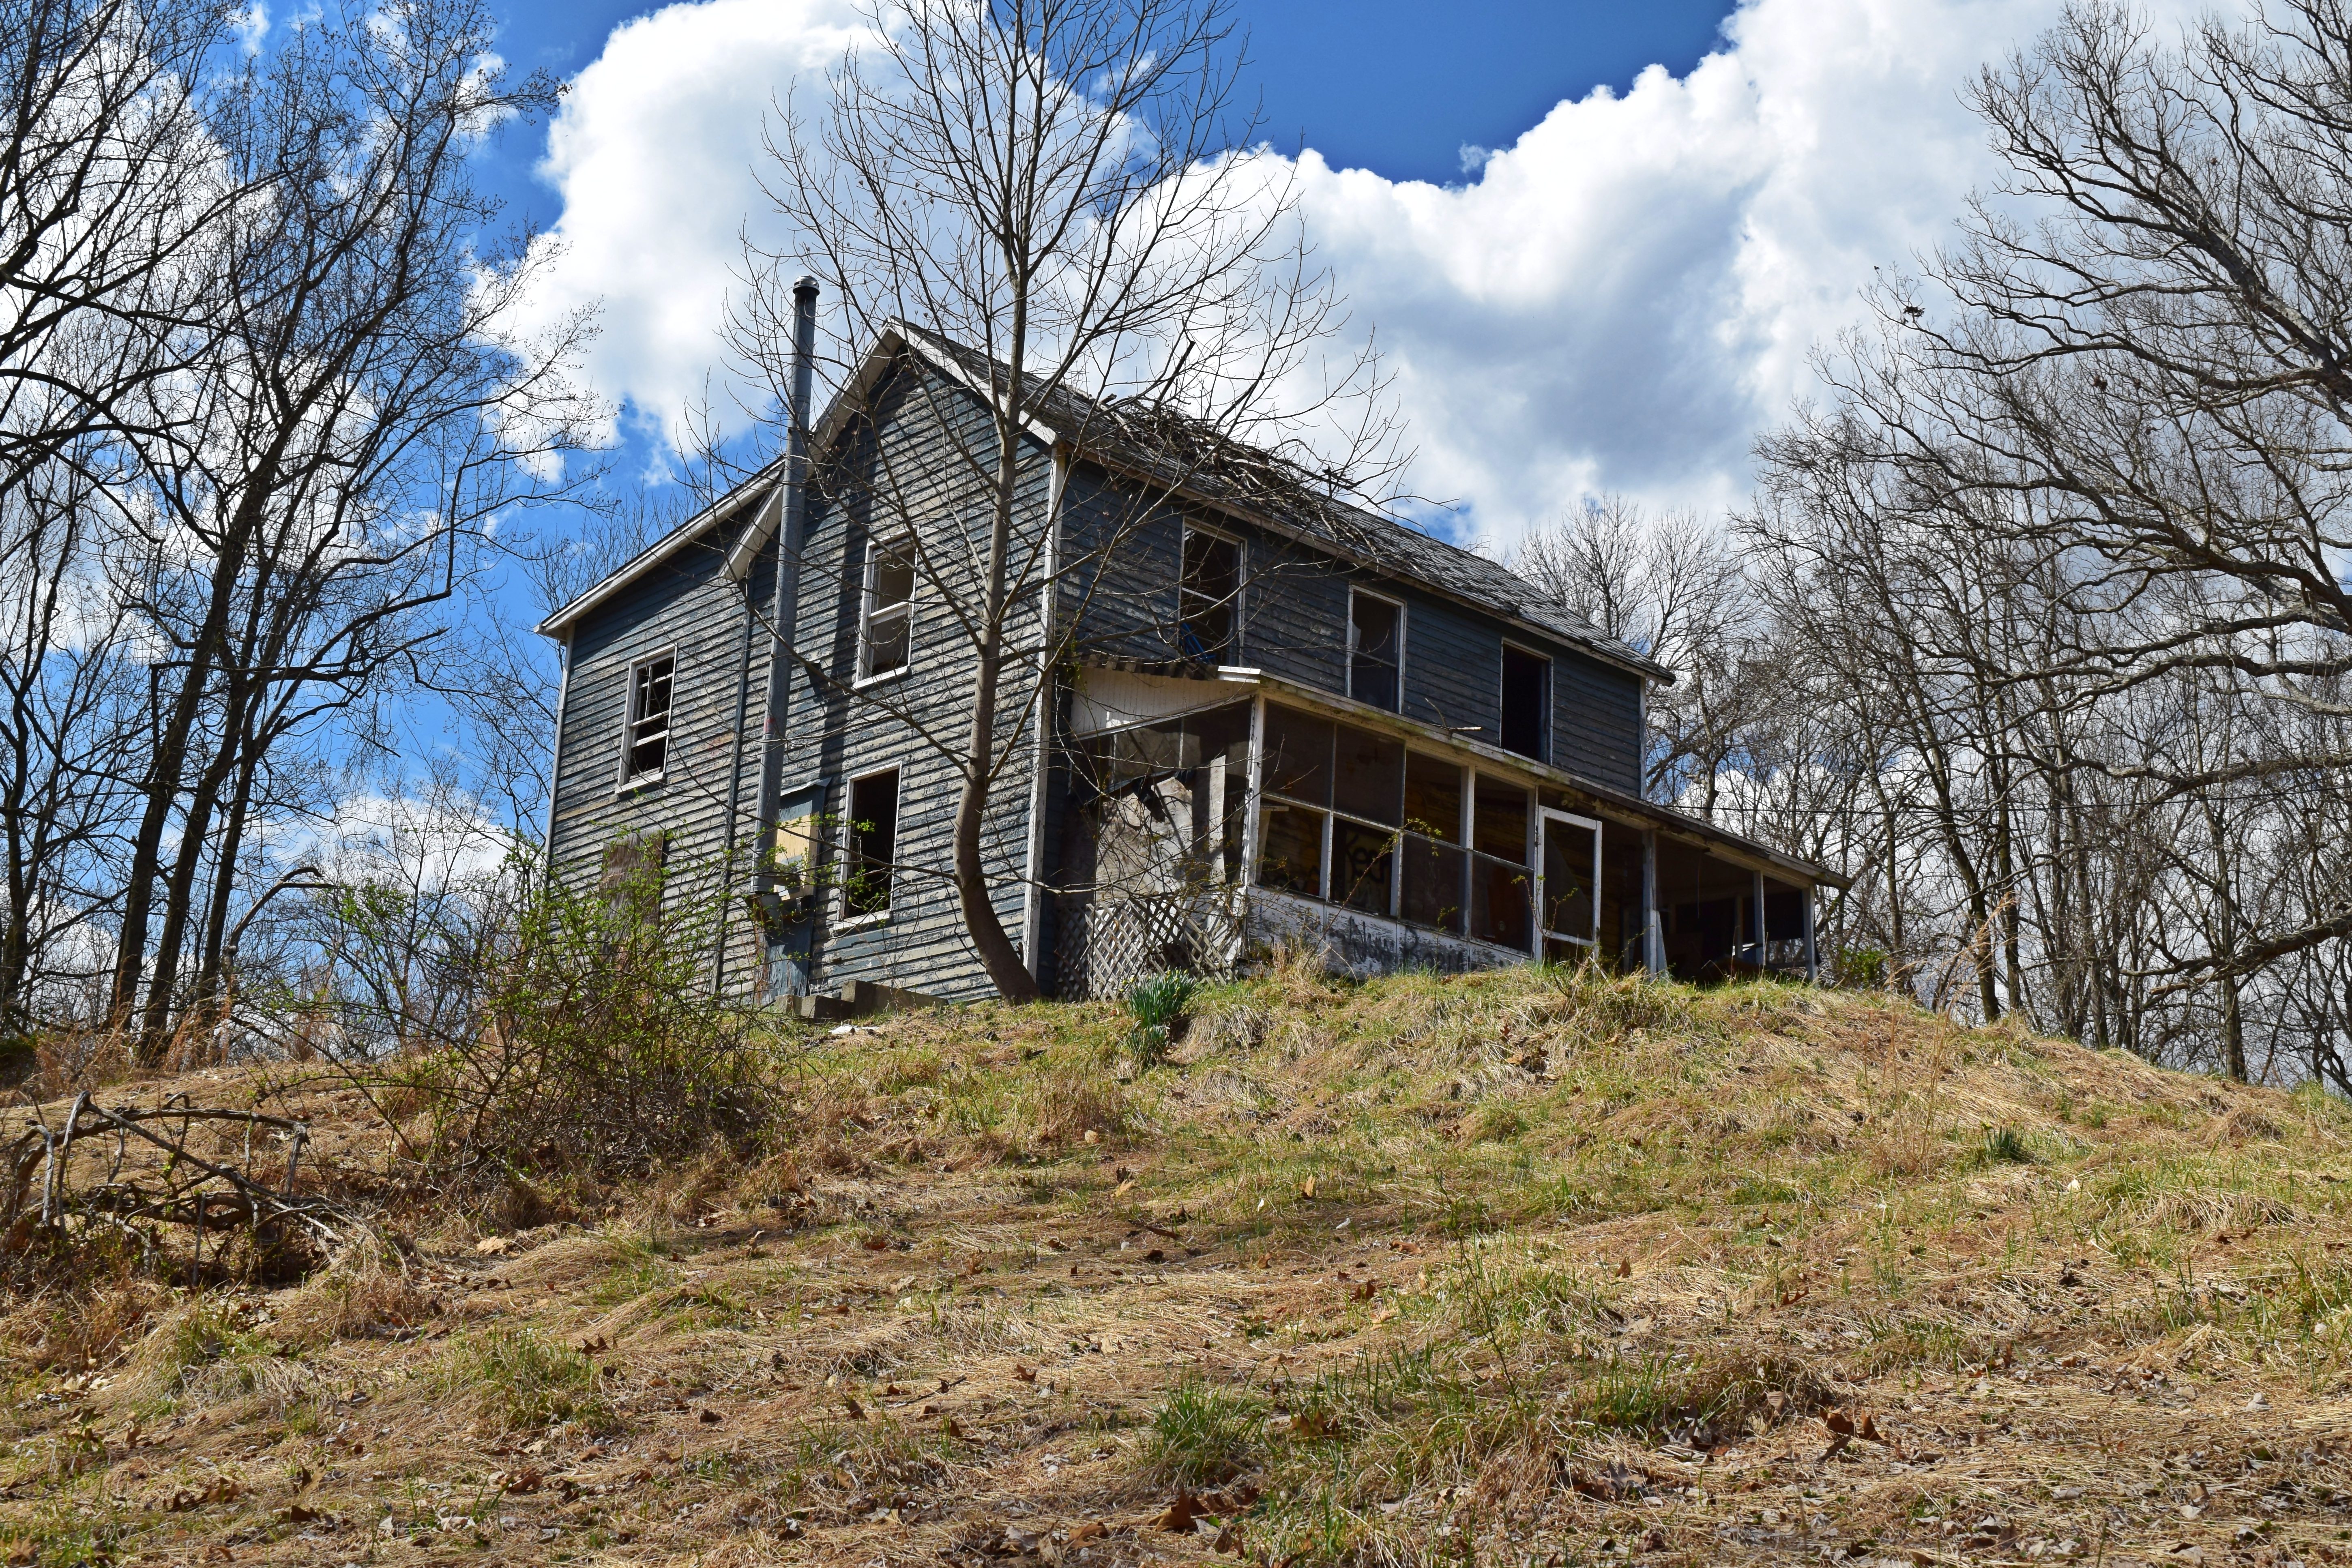 The Schumin Web » Exploring an abandoned house…